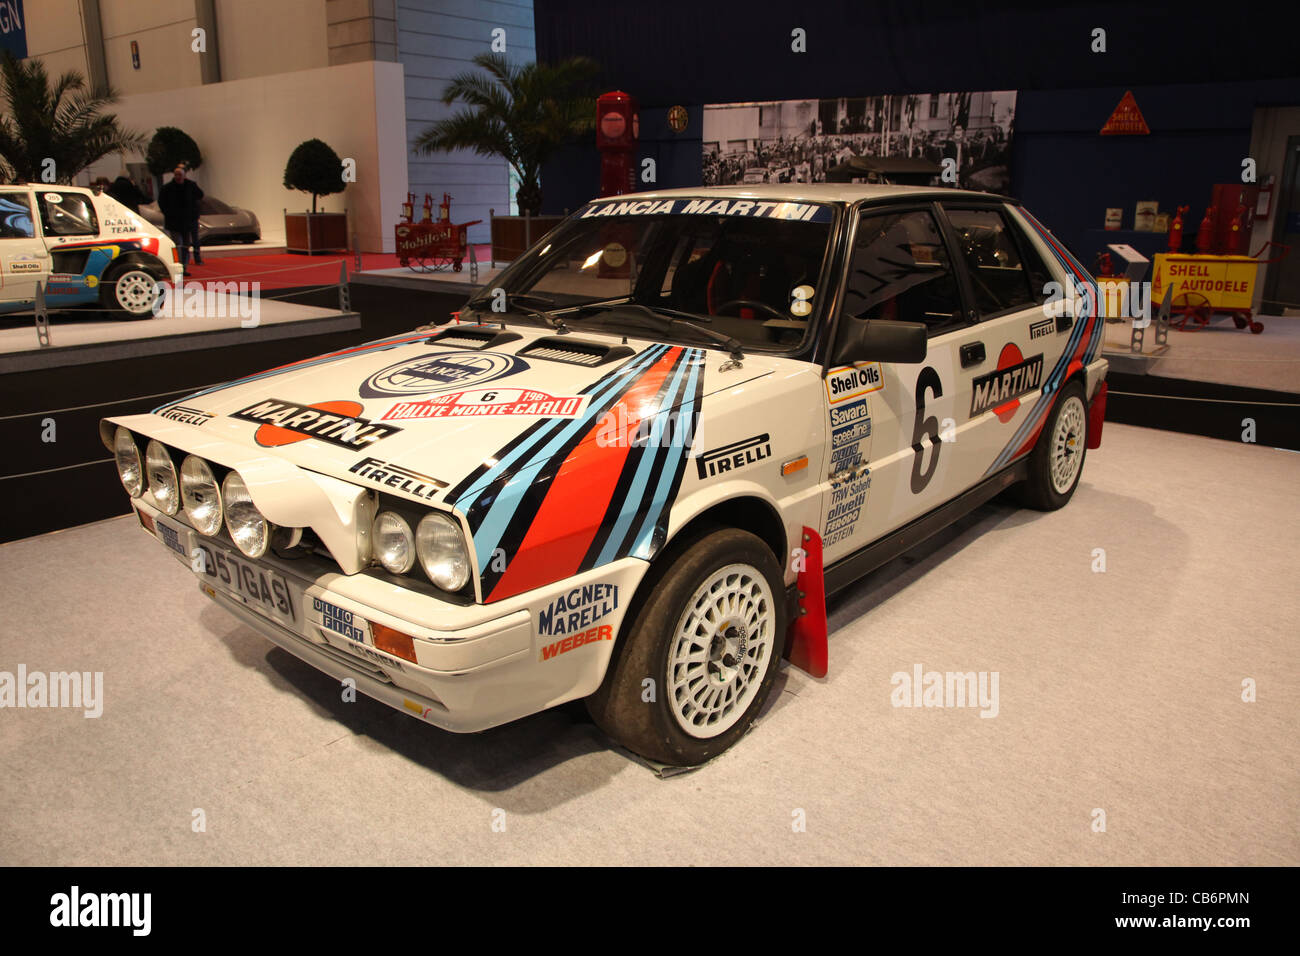 Lancia Delta H.F. Integrale shown at the Essen Motor Show in Essen, Germany, on November 29, 2011 Stock Photo